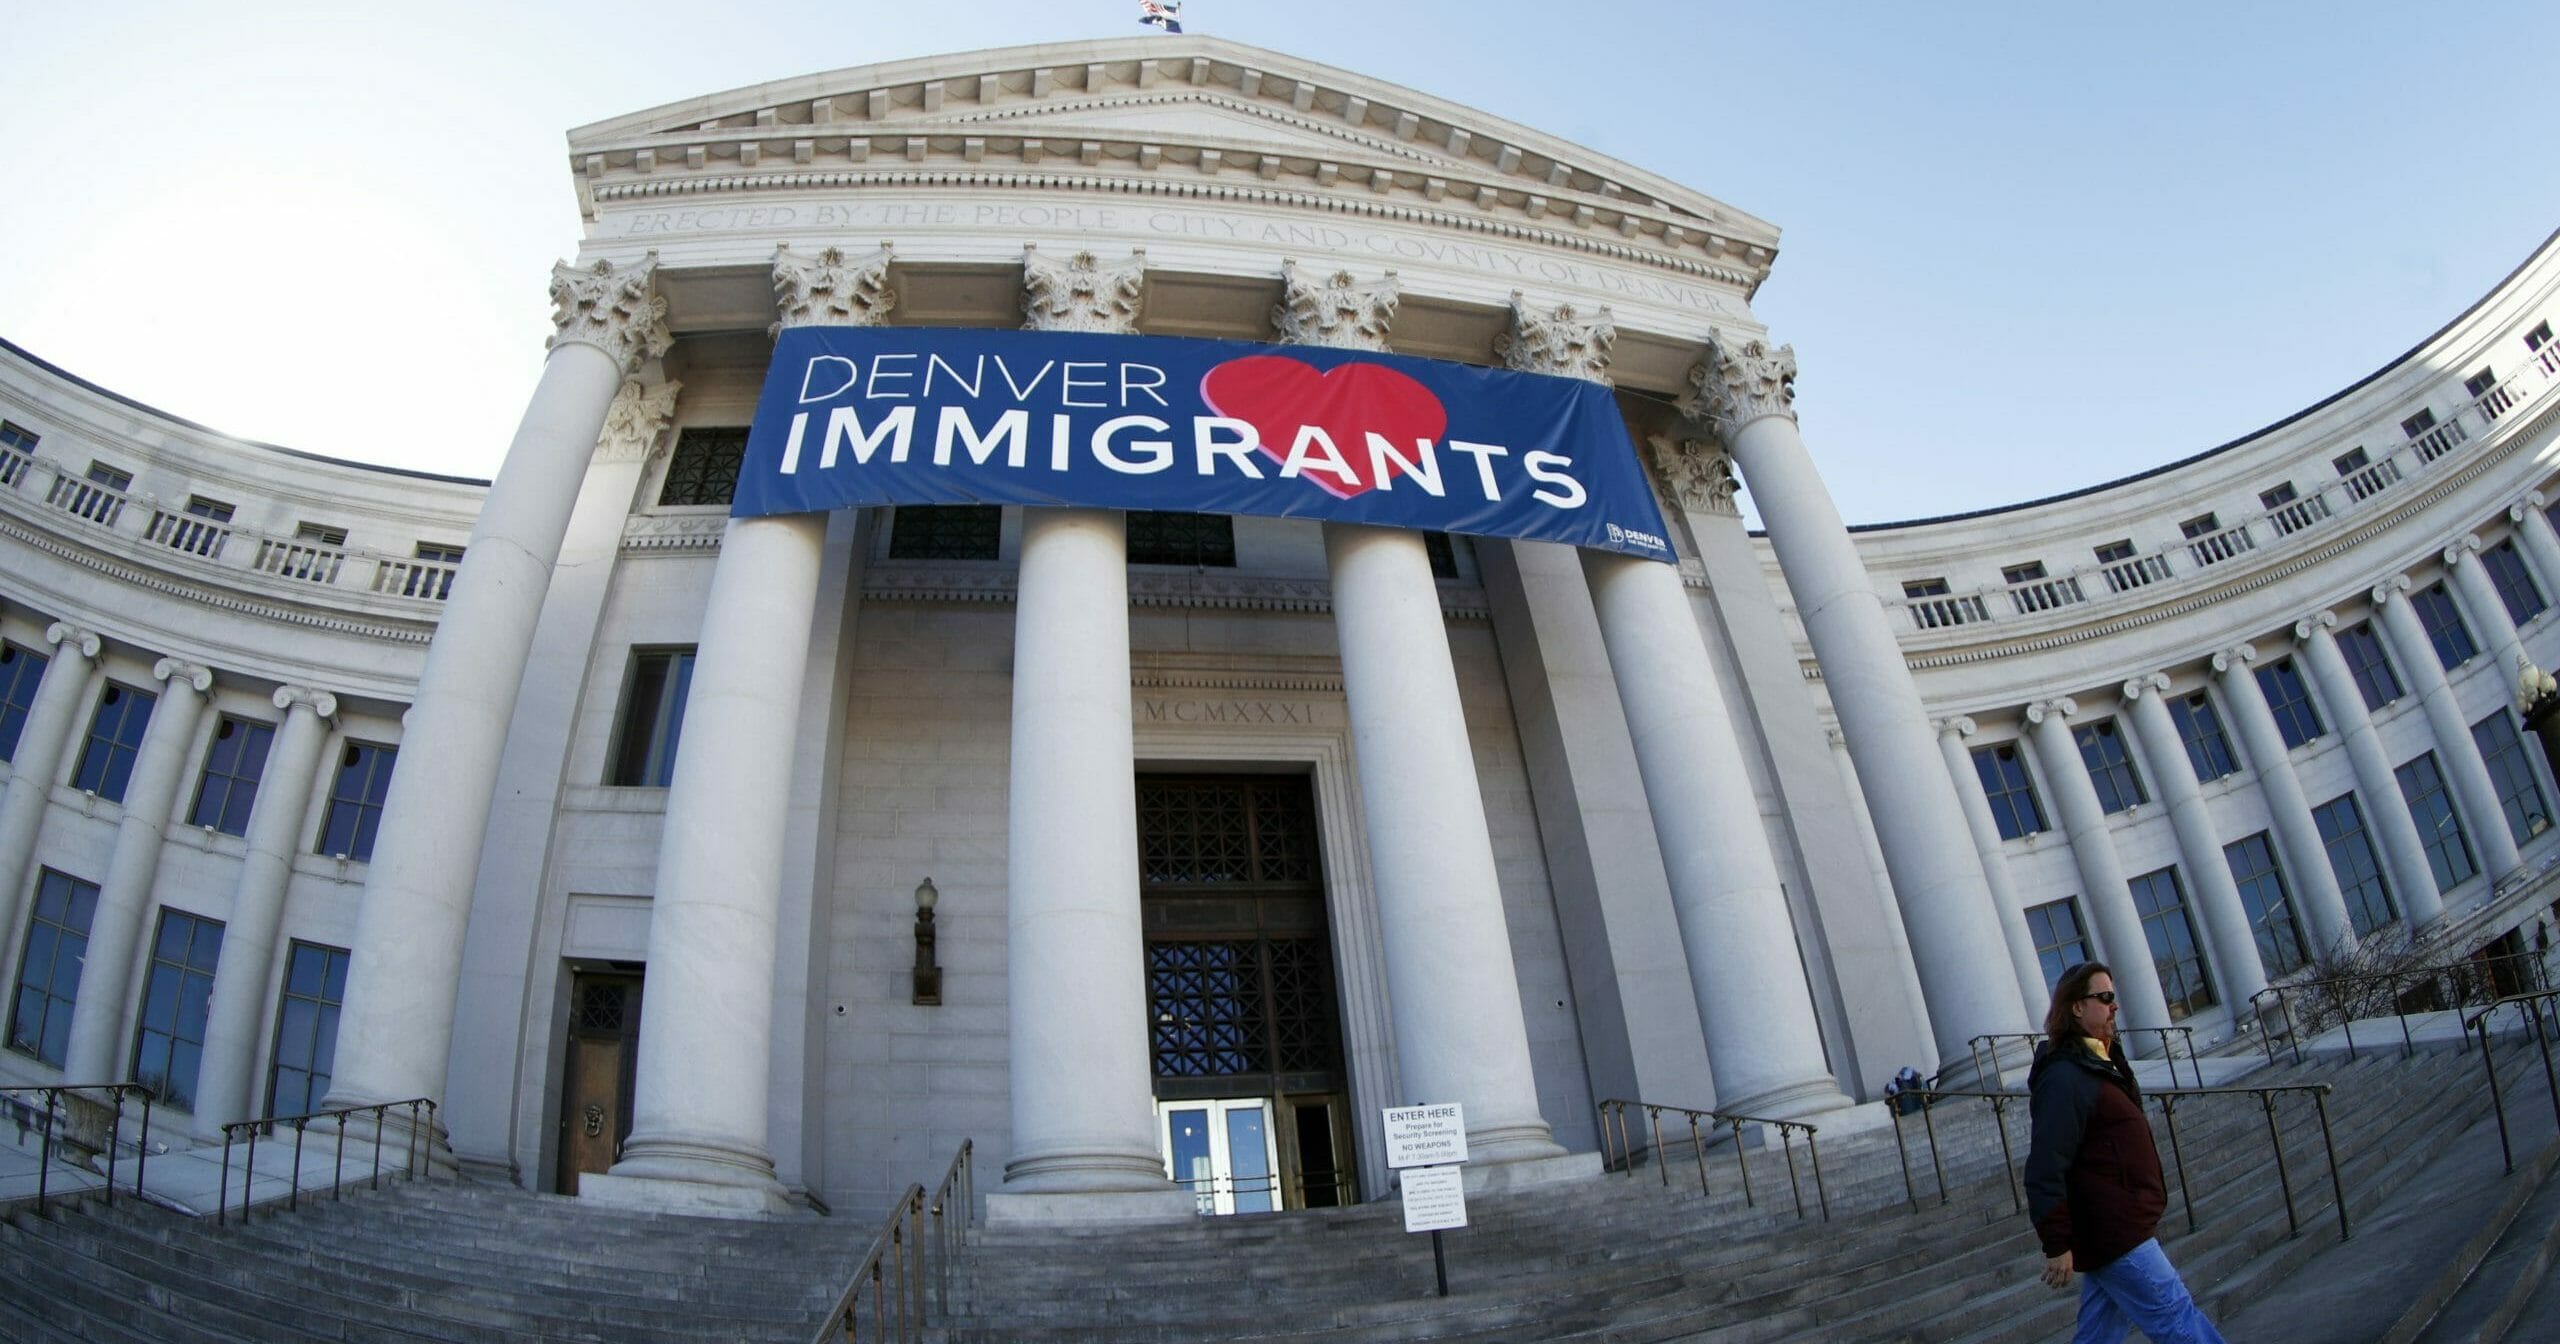 In this Feb. 26, 2018, file photo, a banner to welcome immigrants is viewed through a fisheye lens over the main entrance to the Denver City and County Building in Denver. U.S. Immigration and Customs Enforcement has subpoenaed Denver law enforcement for information on four foreign nationals wanted for deportation and could expand the unusual practice to other cities, an escalation of the conflict between federal officials and so-called sanctuary cities.